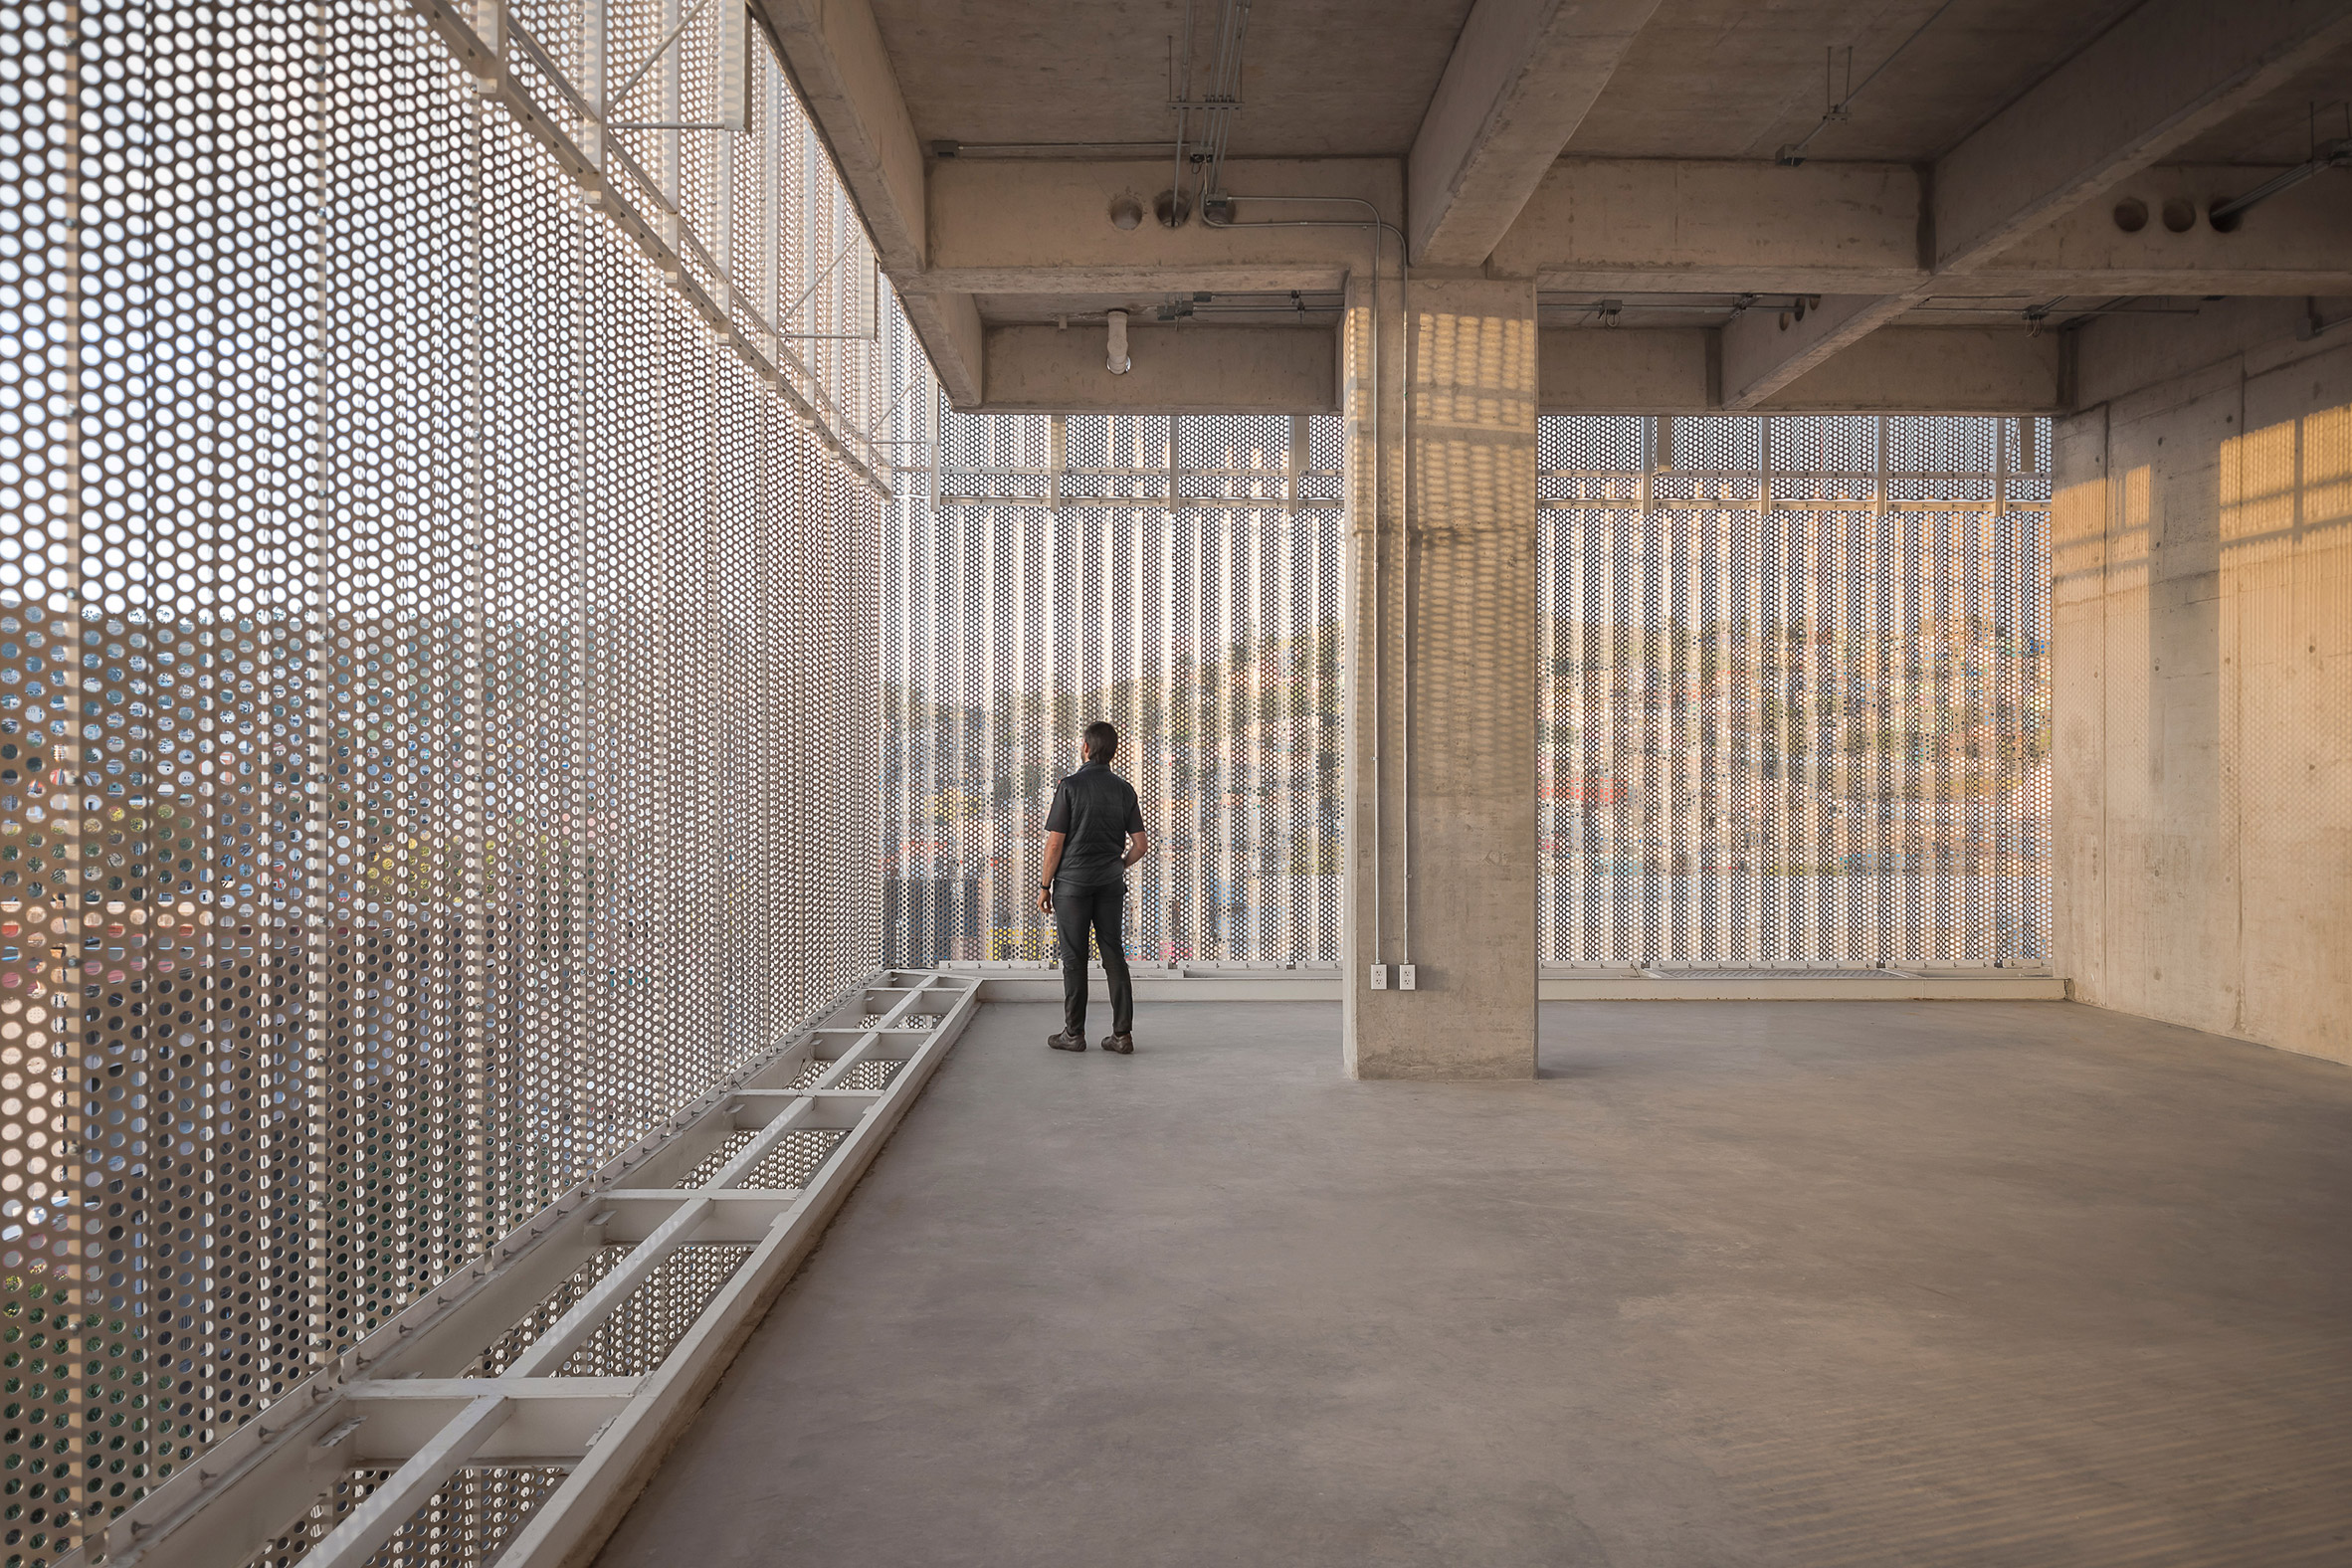 Concrete super structure and perforated metal facade